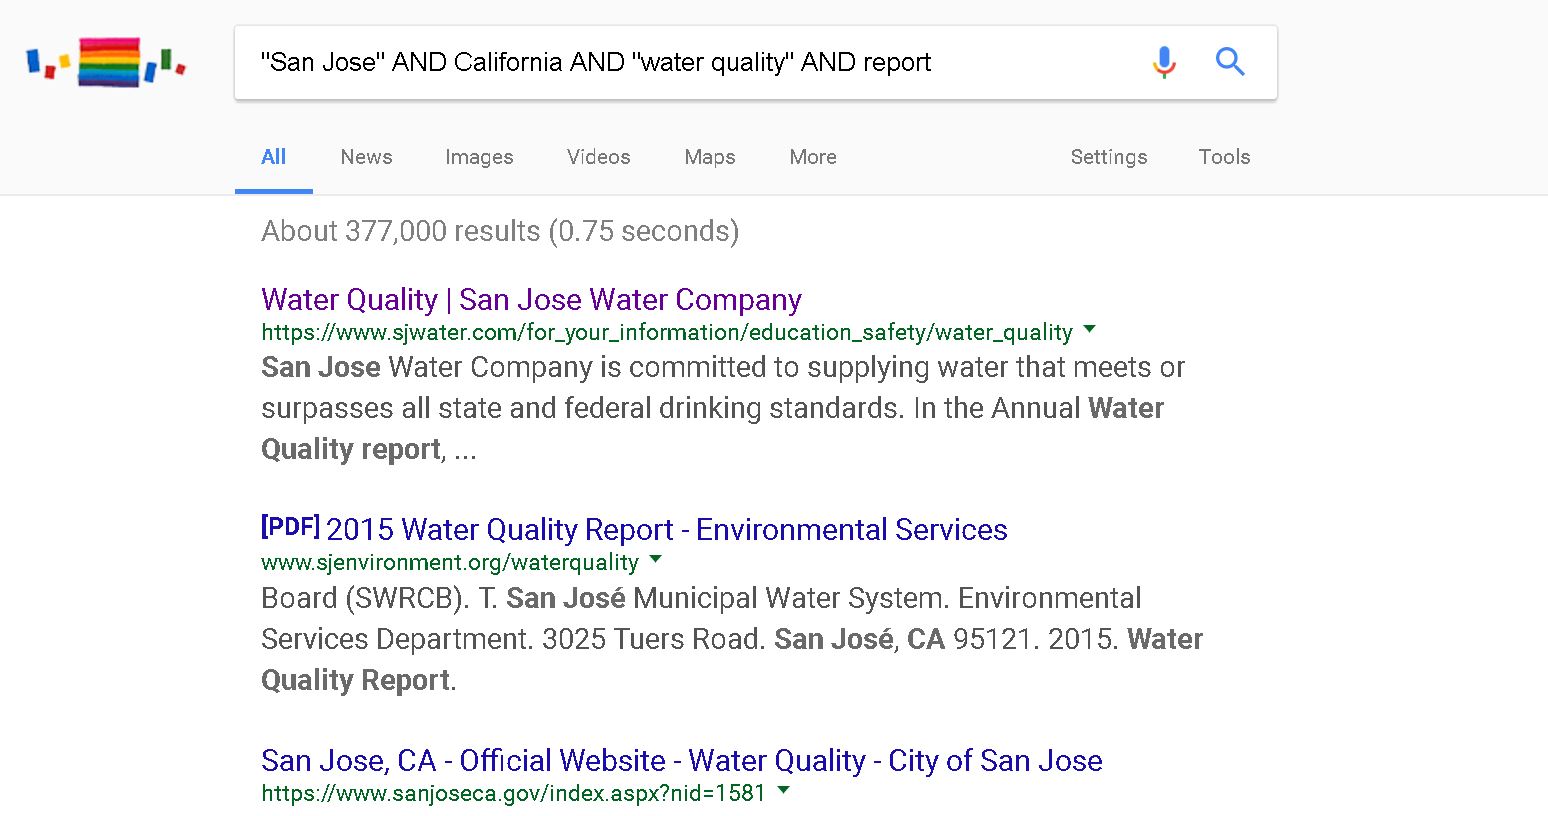 Googling Water Quality Report